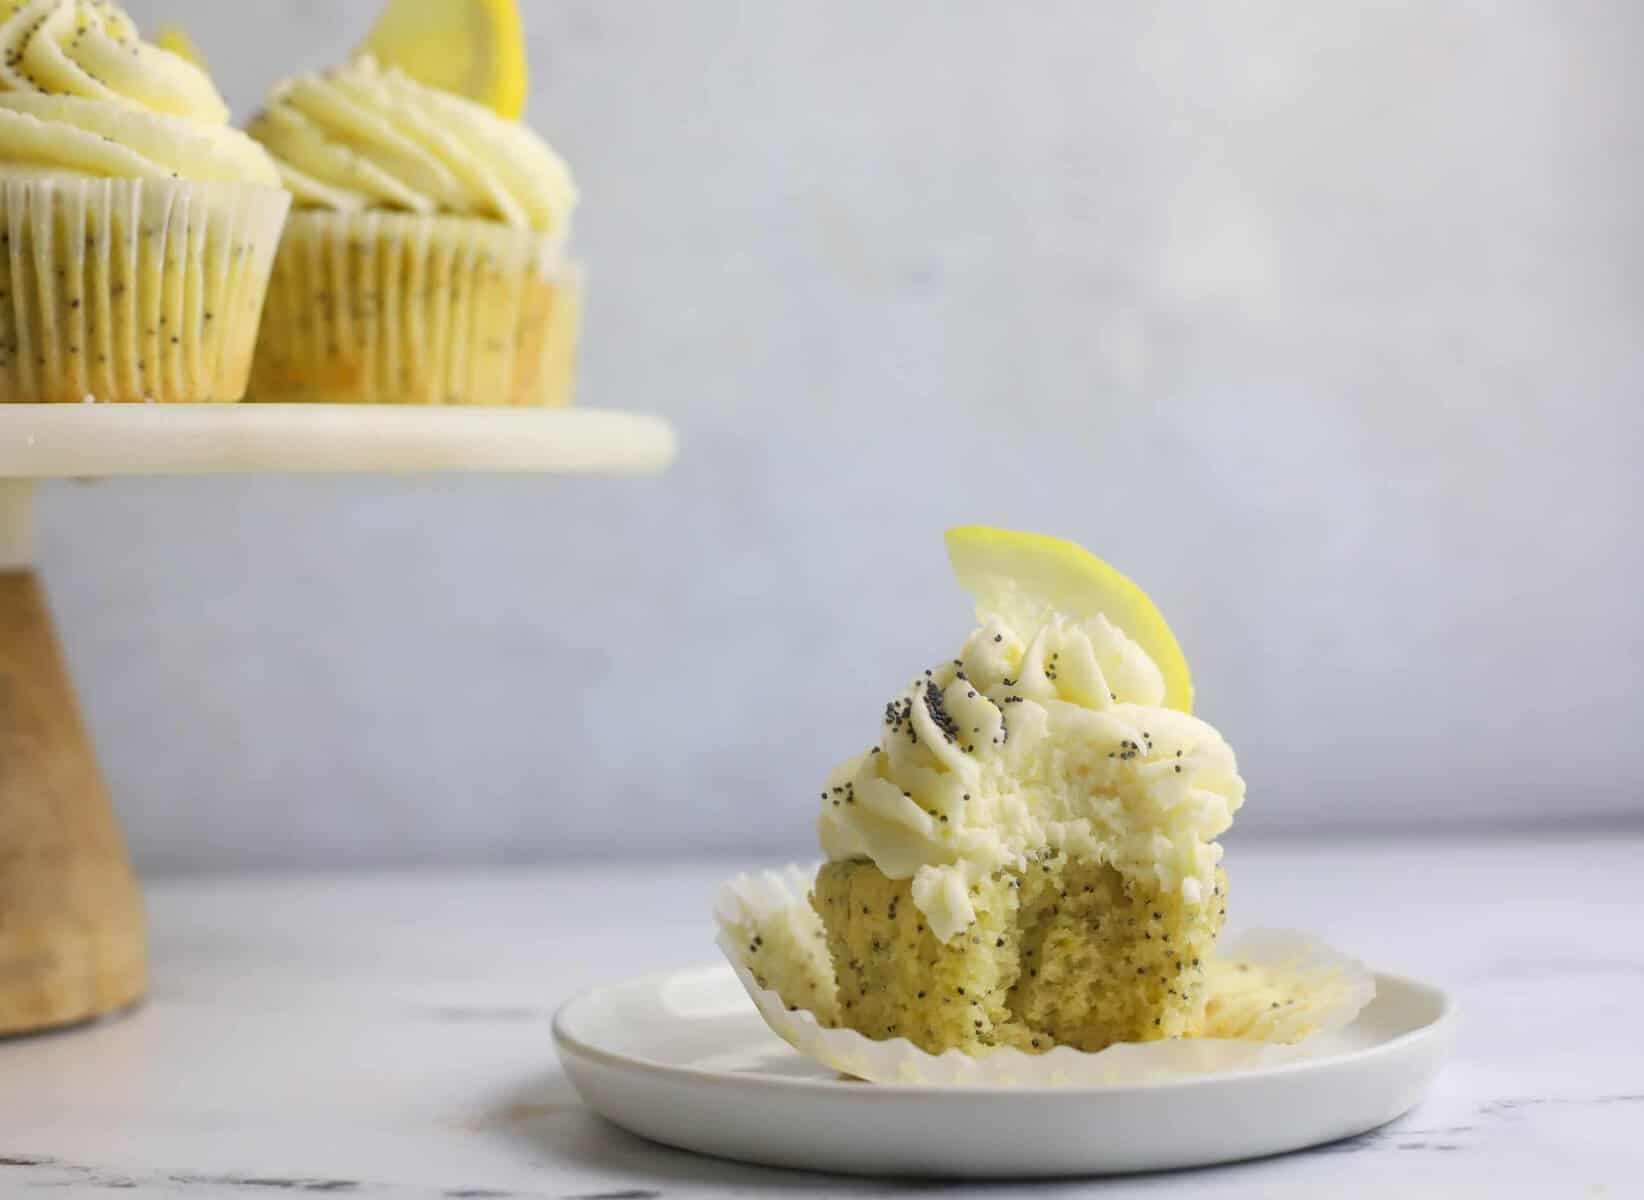 lemon cupcake with a bite taken out of it